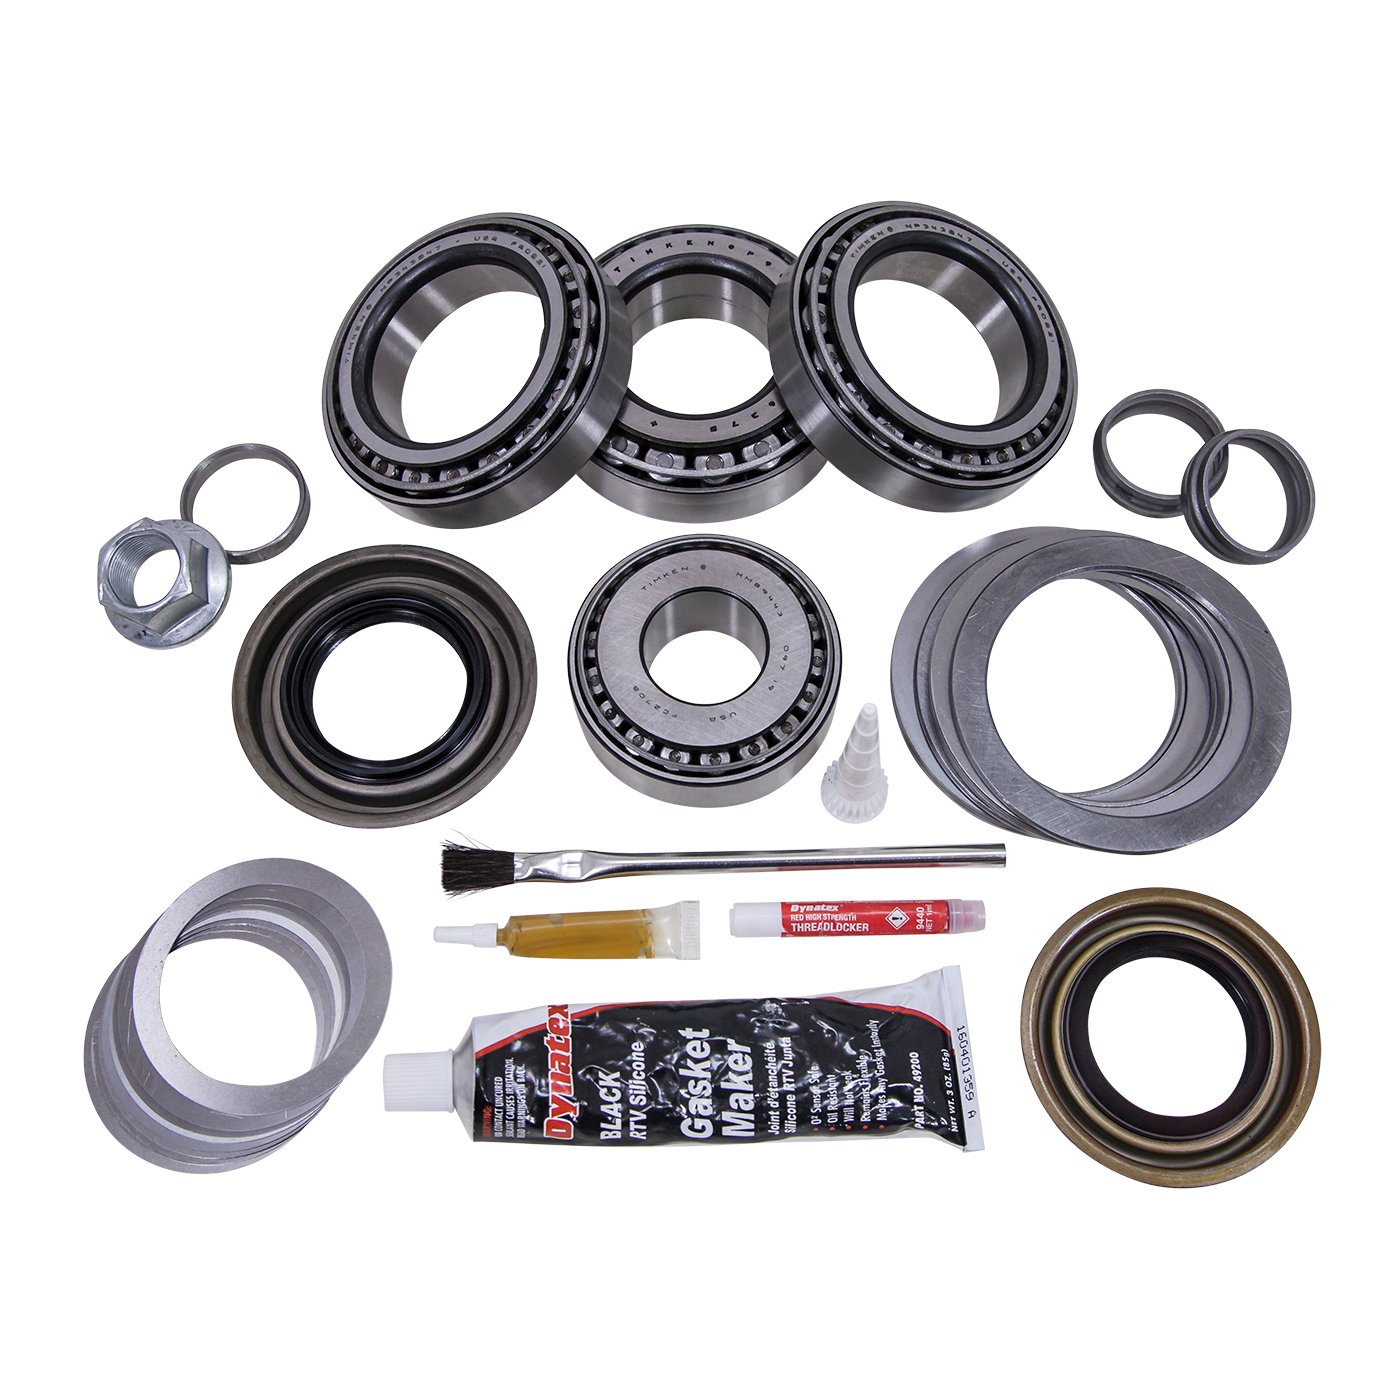 USA Standard ZK F9.75-D Master Overhaul Kit, For '11 & Up Ford 9.75 in. Differential.